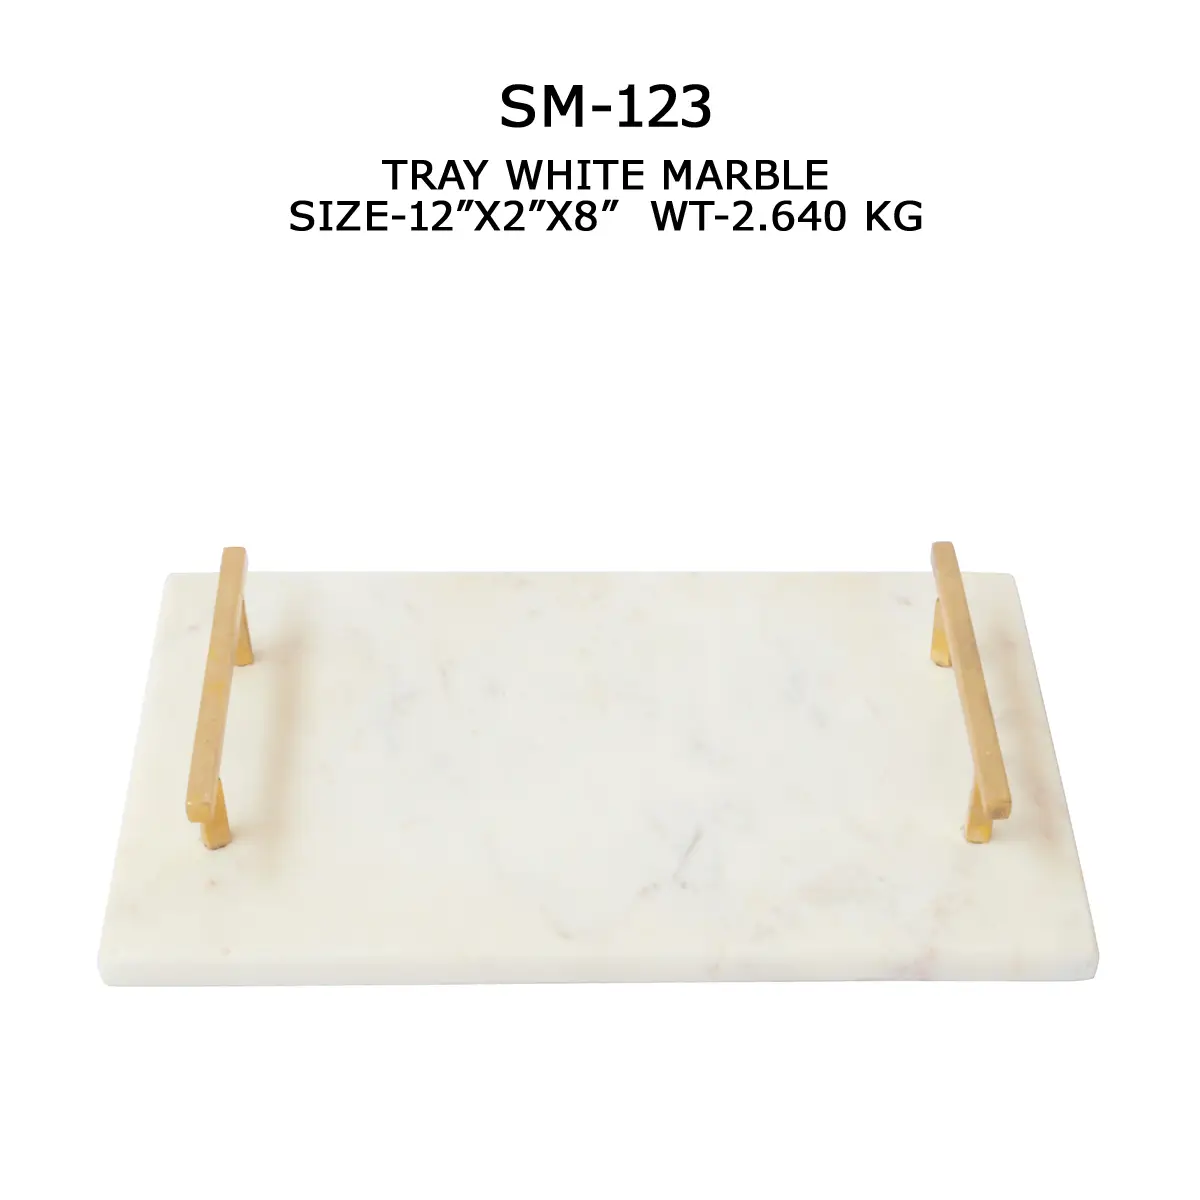 SERVING TRAY WITH METAL HANDLE WHITE MARBLE